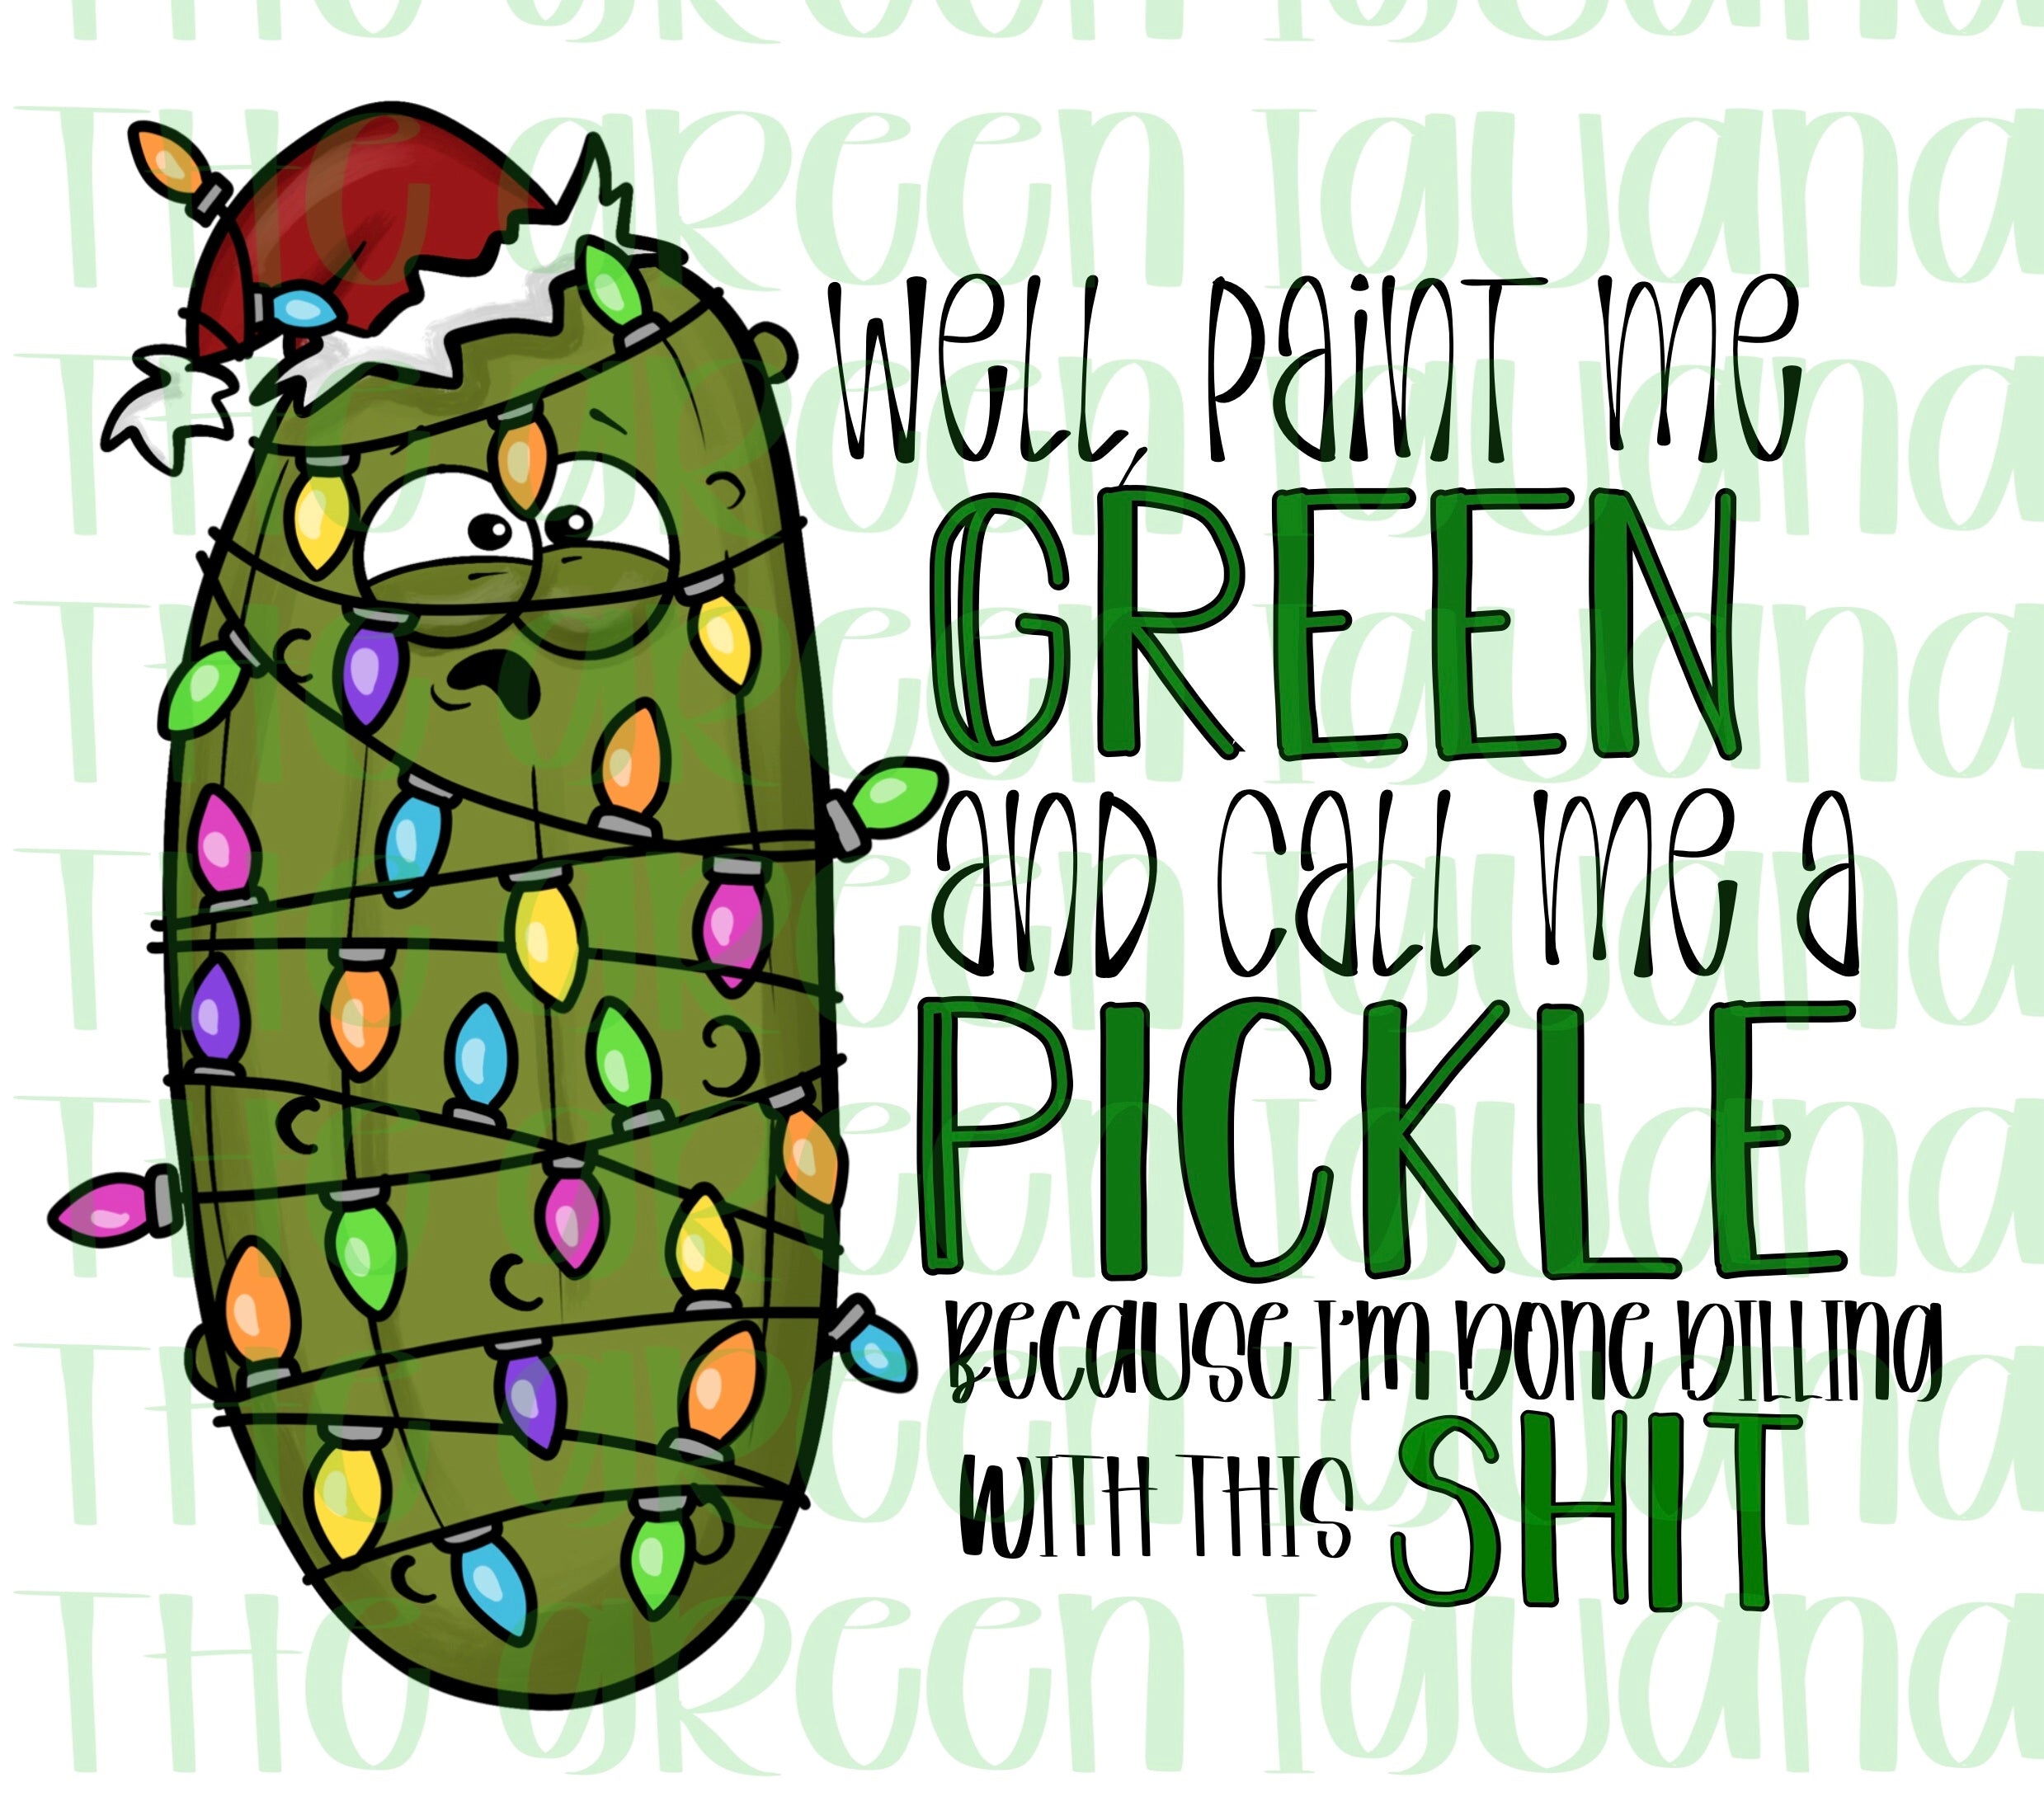 Well, paint me green and call me a pickle because I’m done dilling with this shit - DIGITAL